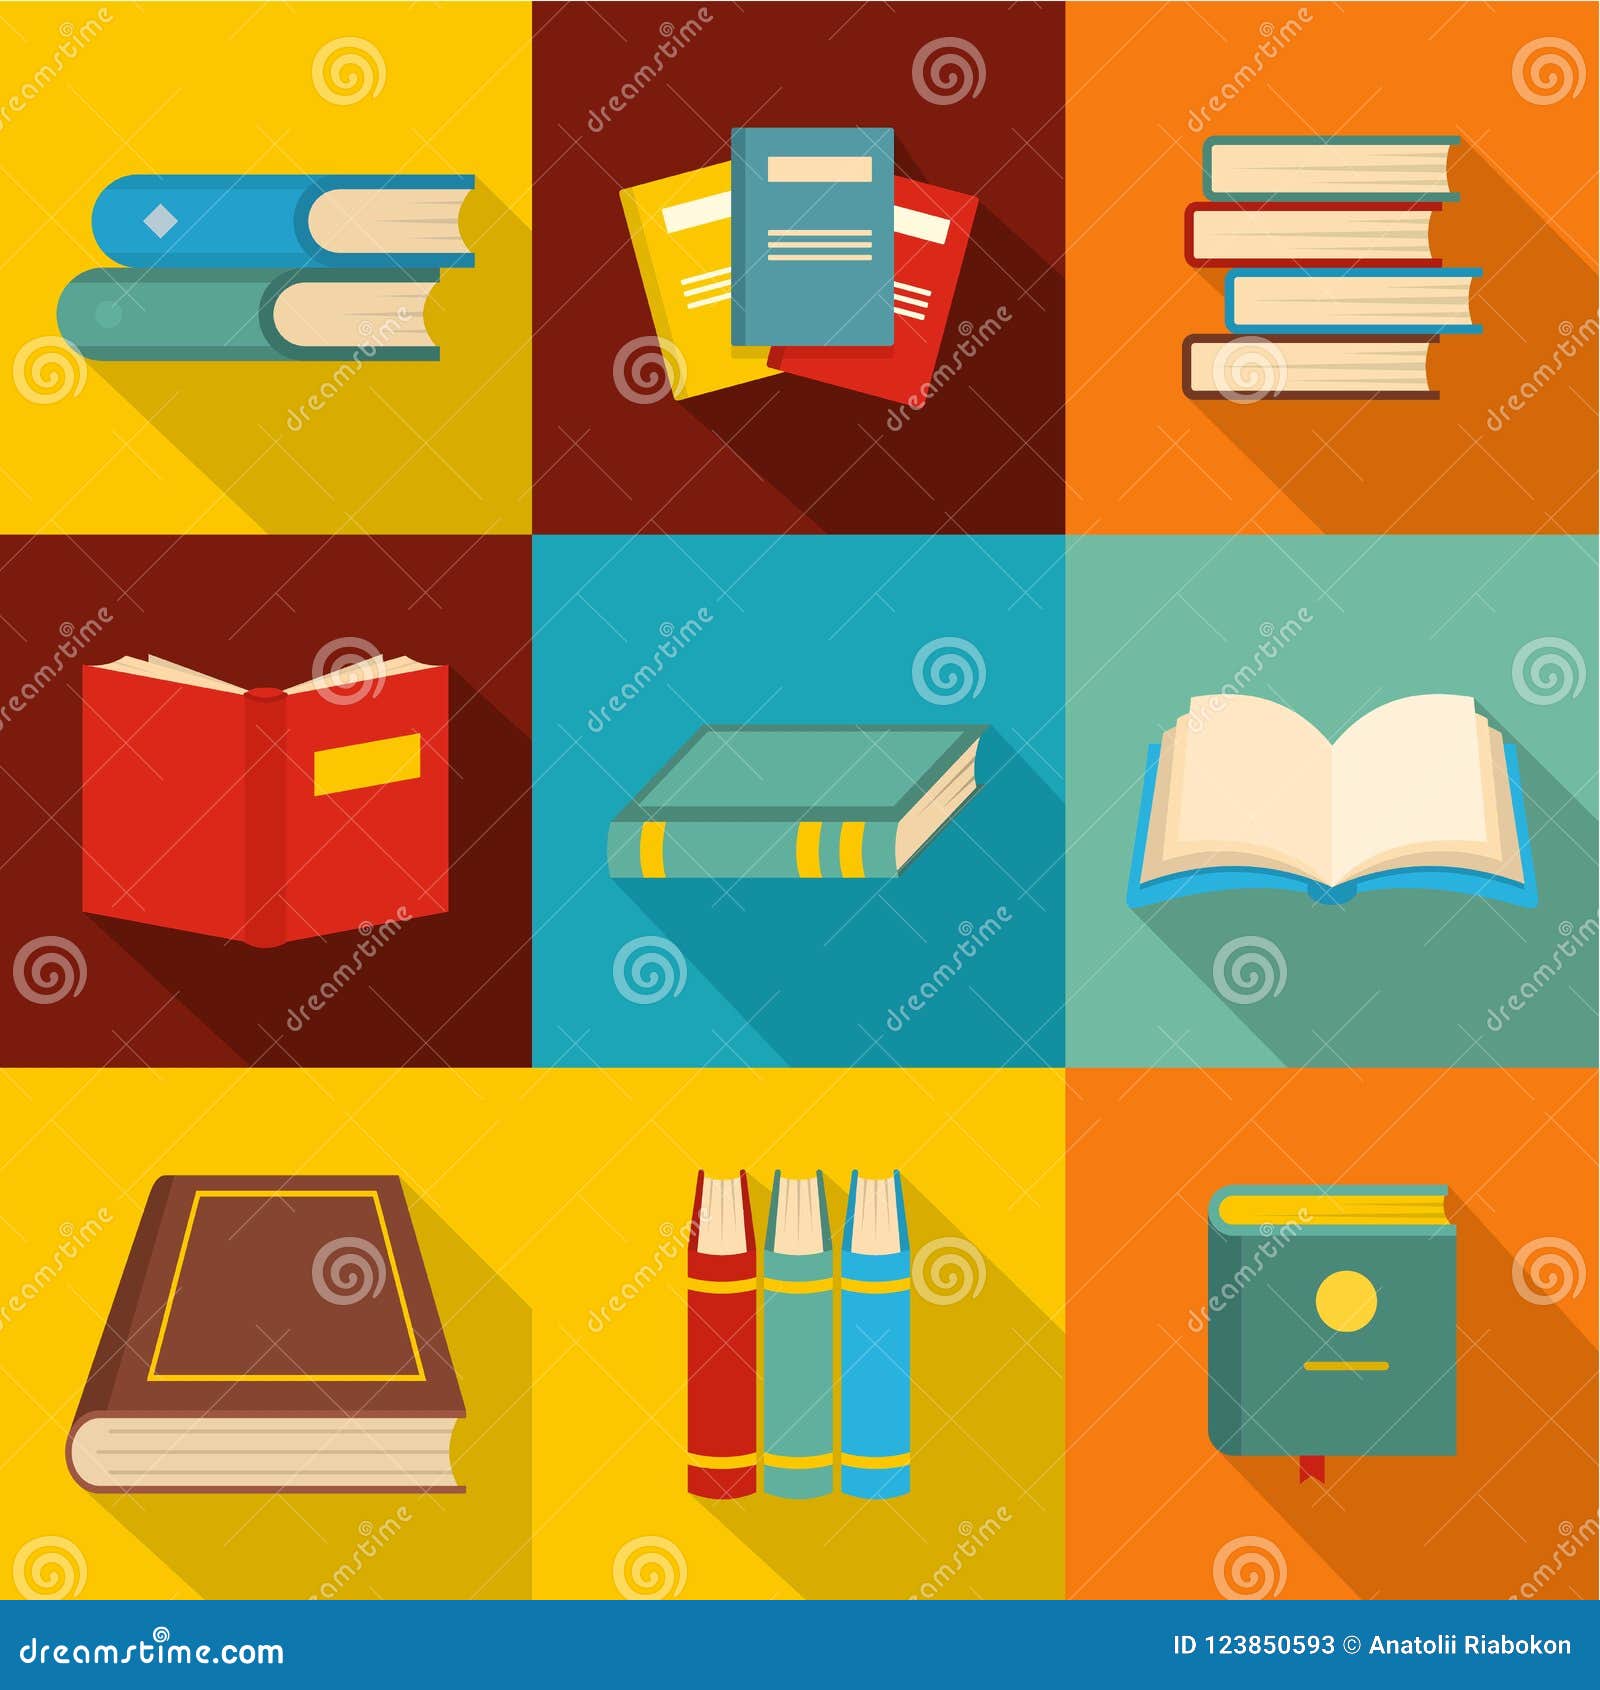 Research Paper Icons Set, Flat Style Stock Illustration - Illustration of  education, page: 123850593